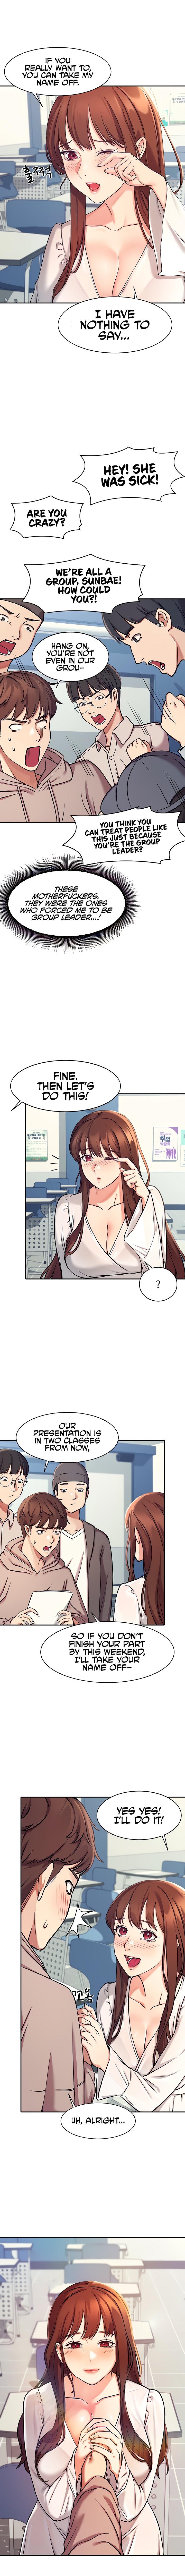 Is There No Goddess in My College? Ch.10/? 12